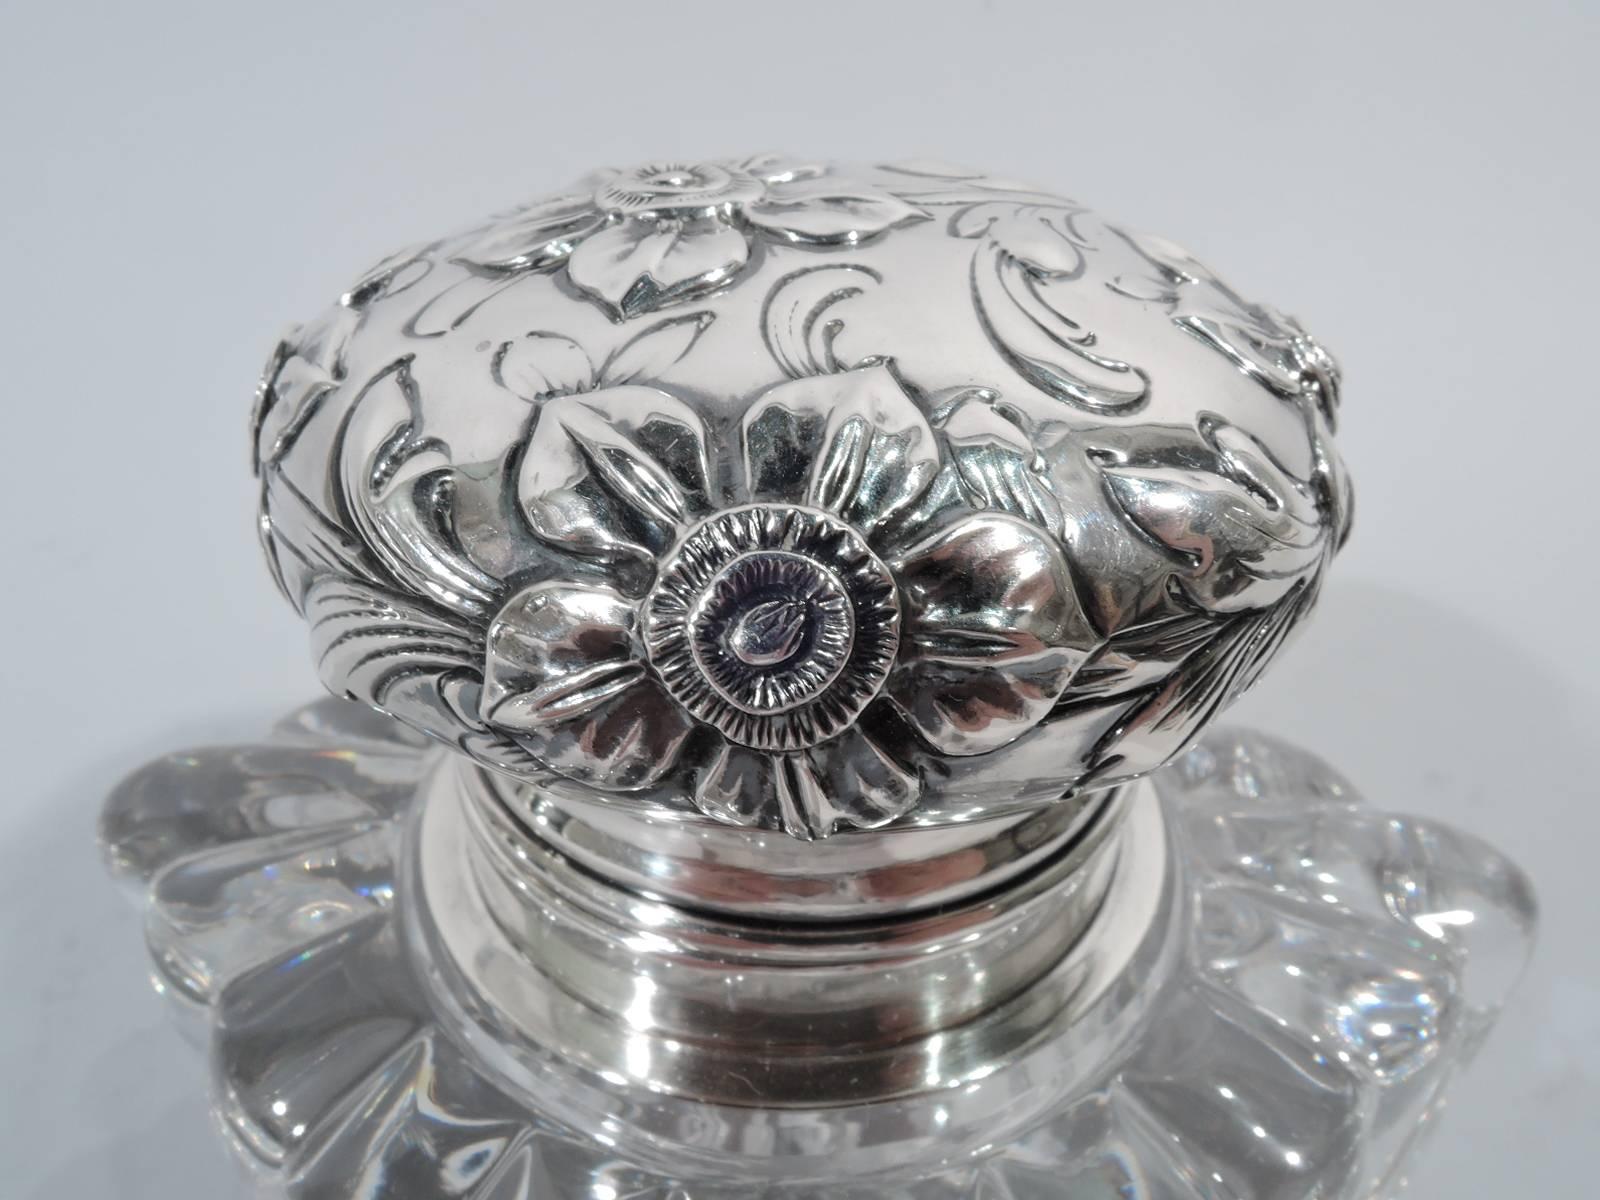 American Antique Shiebler Sterling Silver and Glass Inkwell